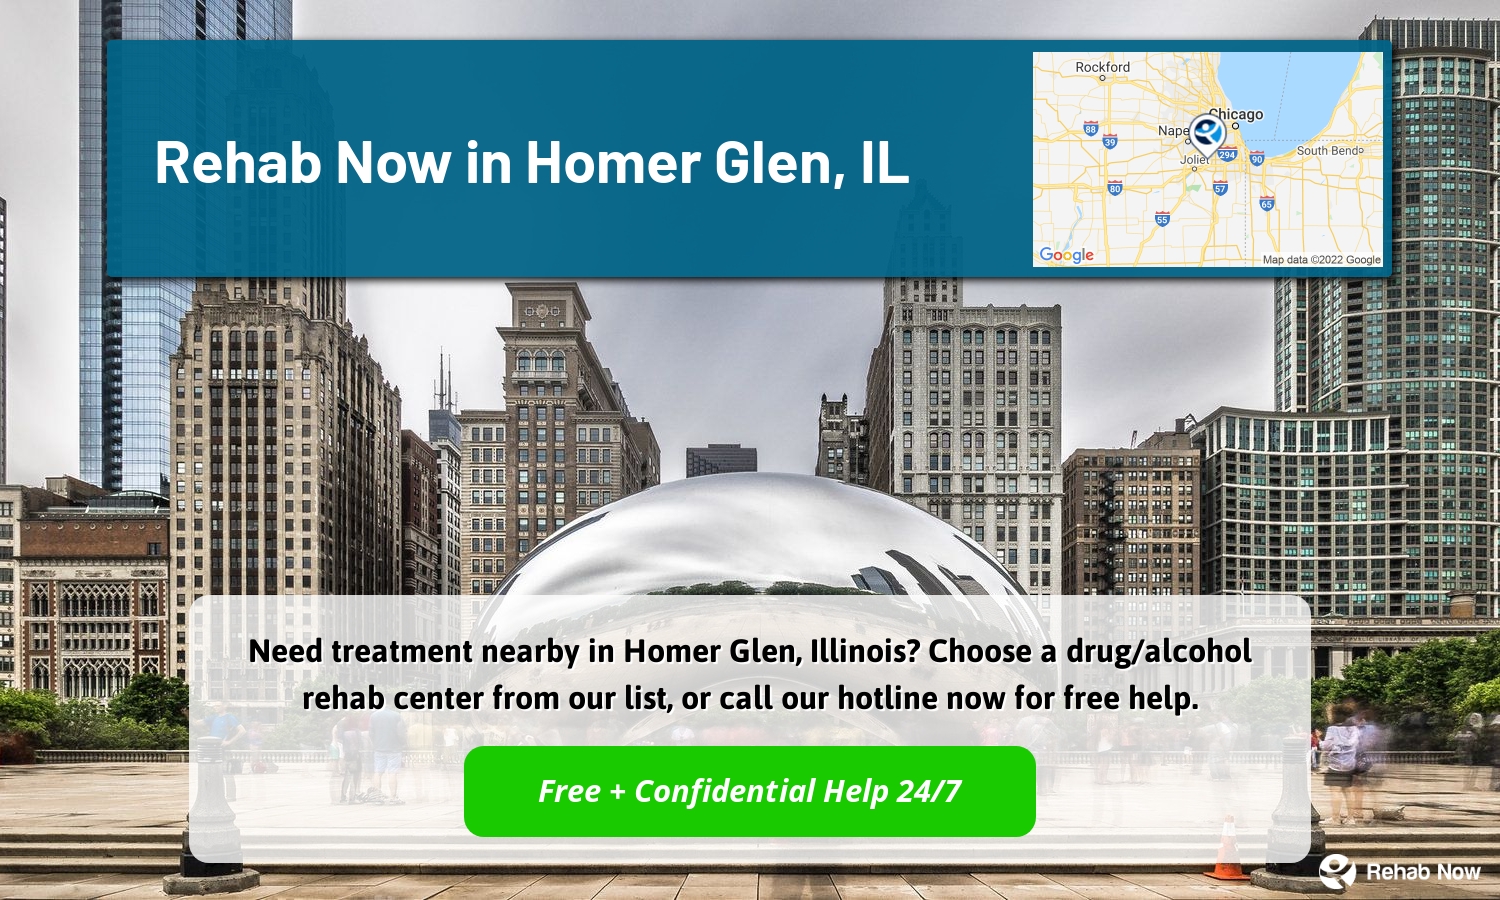 Need treatment nearby in Homer Glen, Illinois? Choose a drug/alcohol rehab center from our list, or call our hotline now for free help.